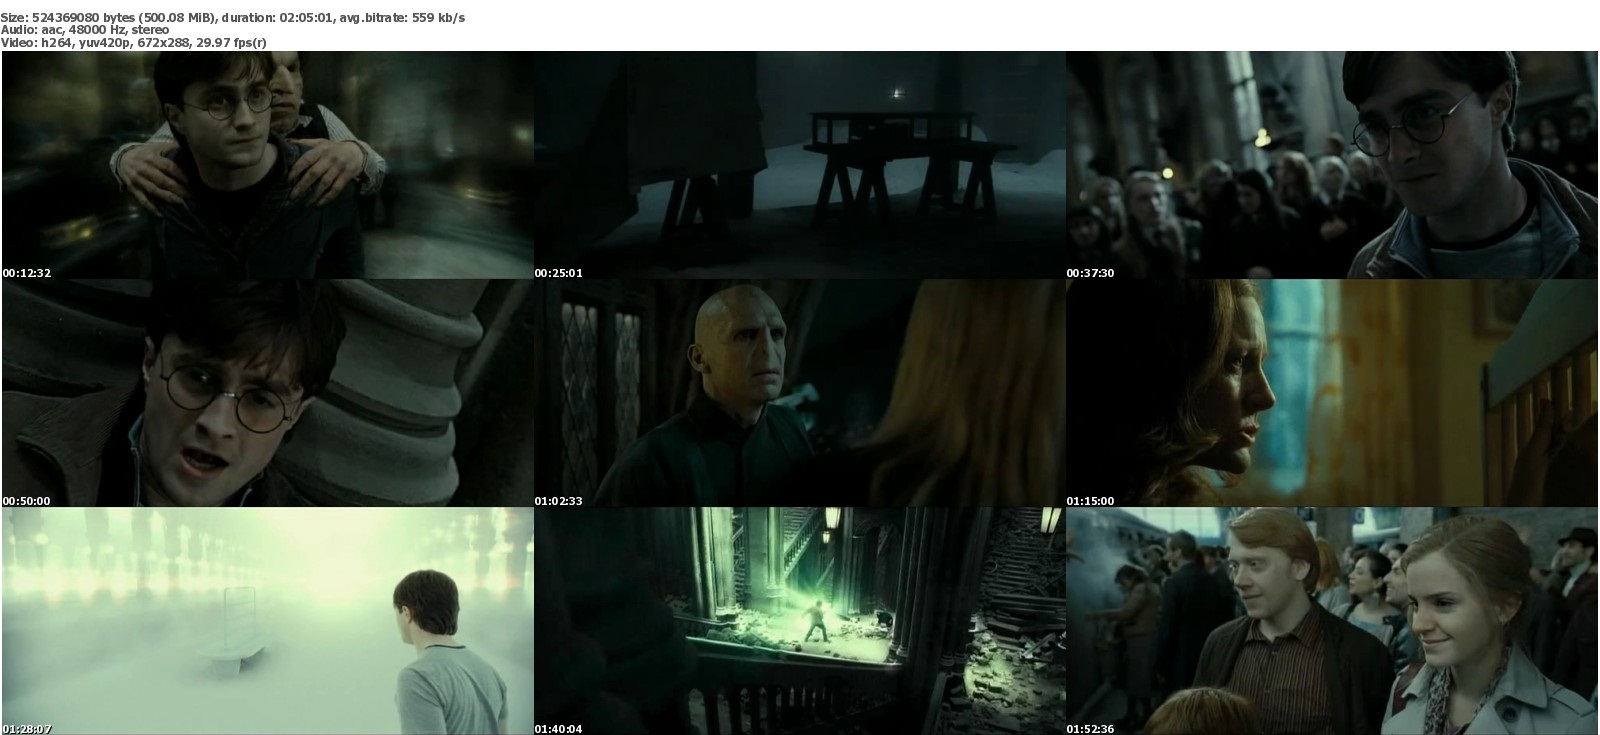  Movie 2011:Harry Potter and the Deathly Hallows: Part 2 2011 DVDRip (500MB)+ subviet Harry+Potter+and+the+Deathly+Hallows+Part+2+%25282011%2529.jpg2